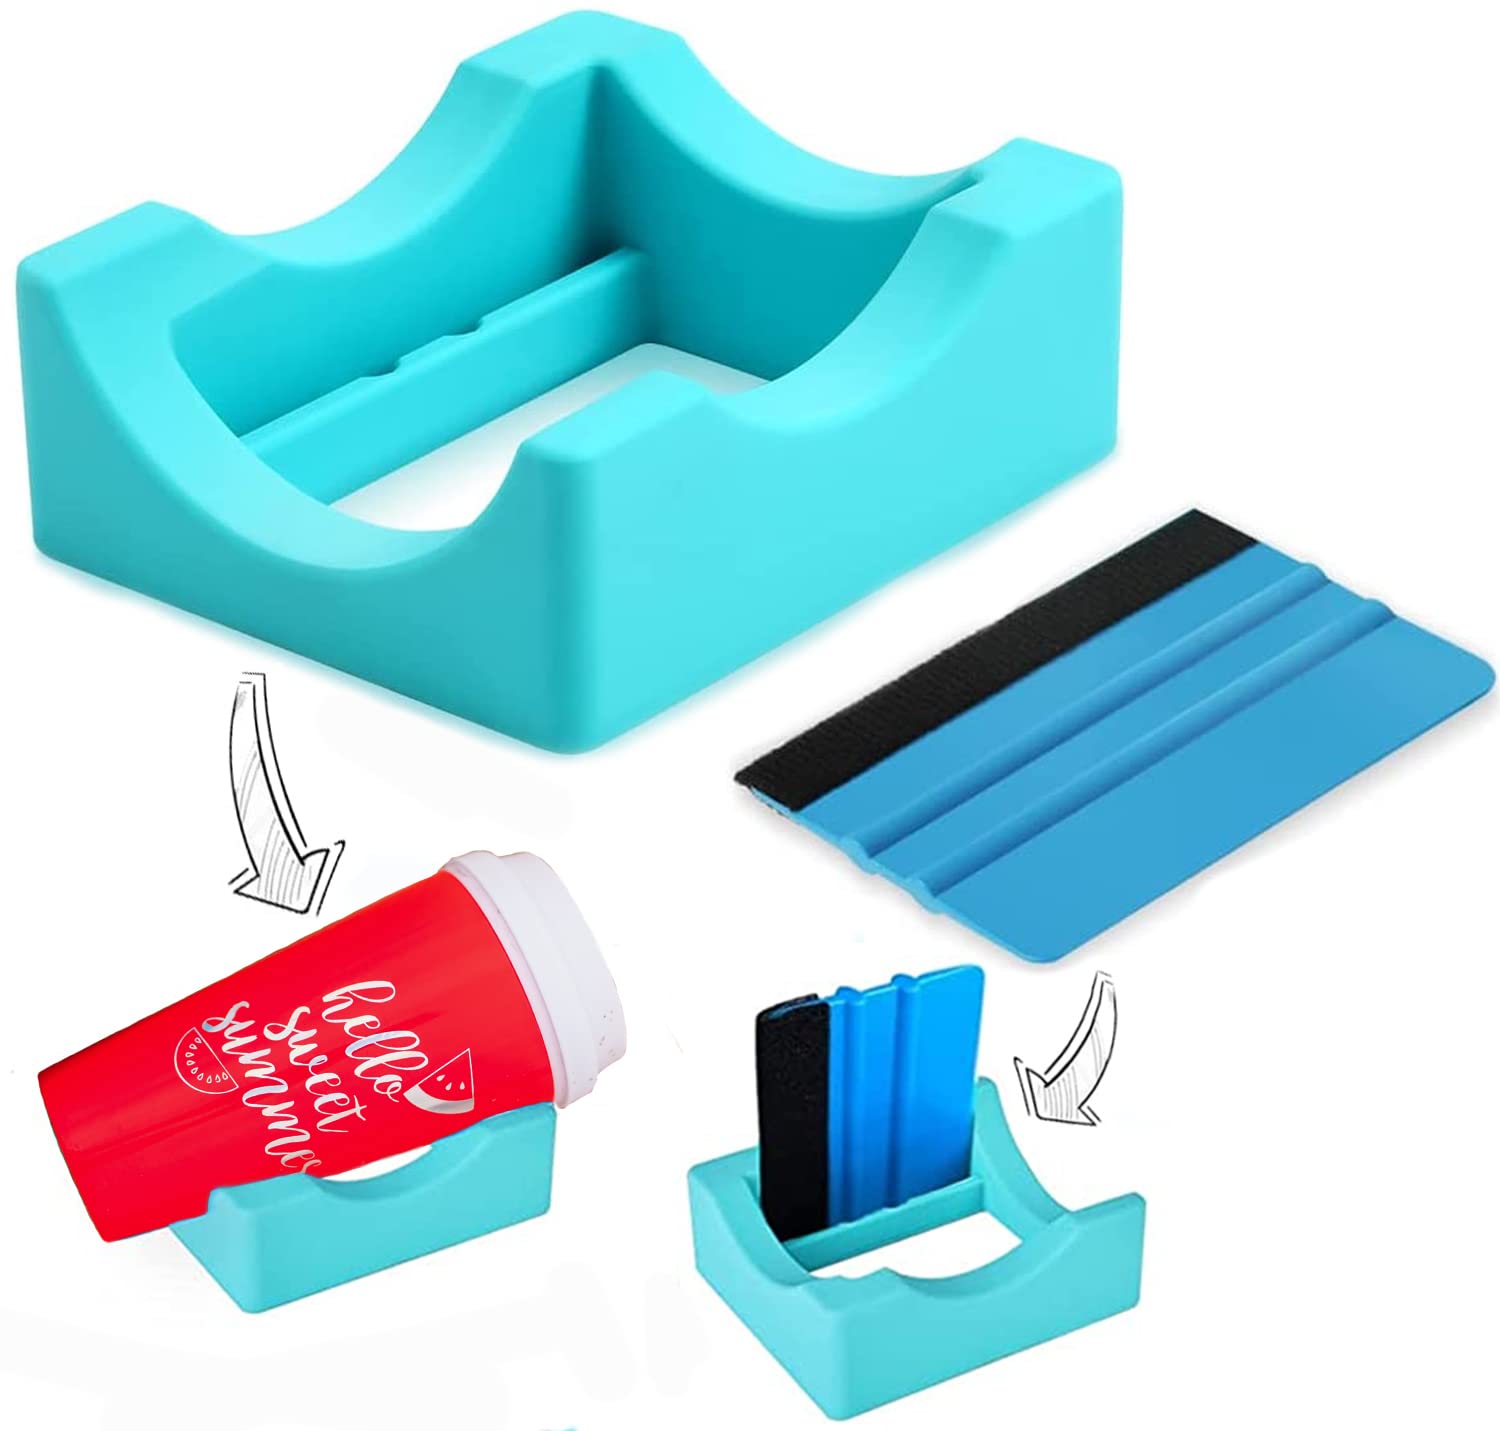 BGick Cup Cradle for Crafting Supplies with Felt Edge Squeegee and Tape Blue